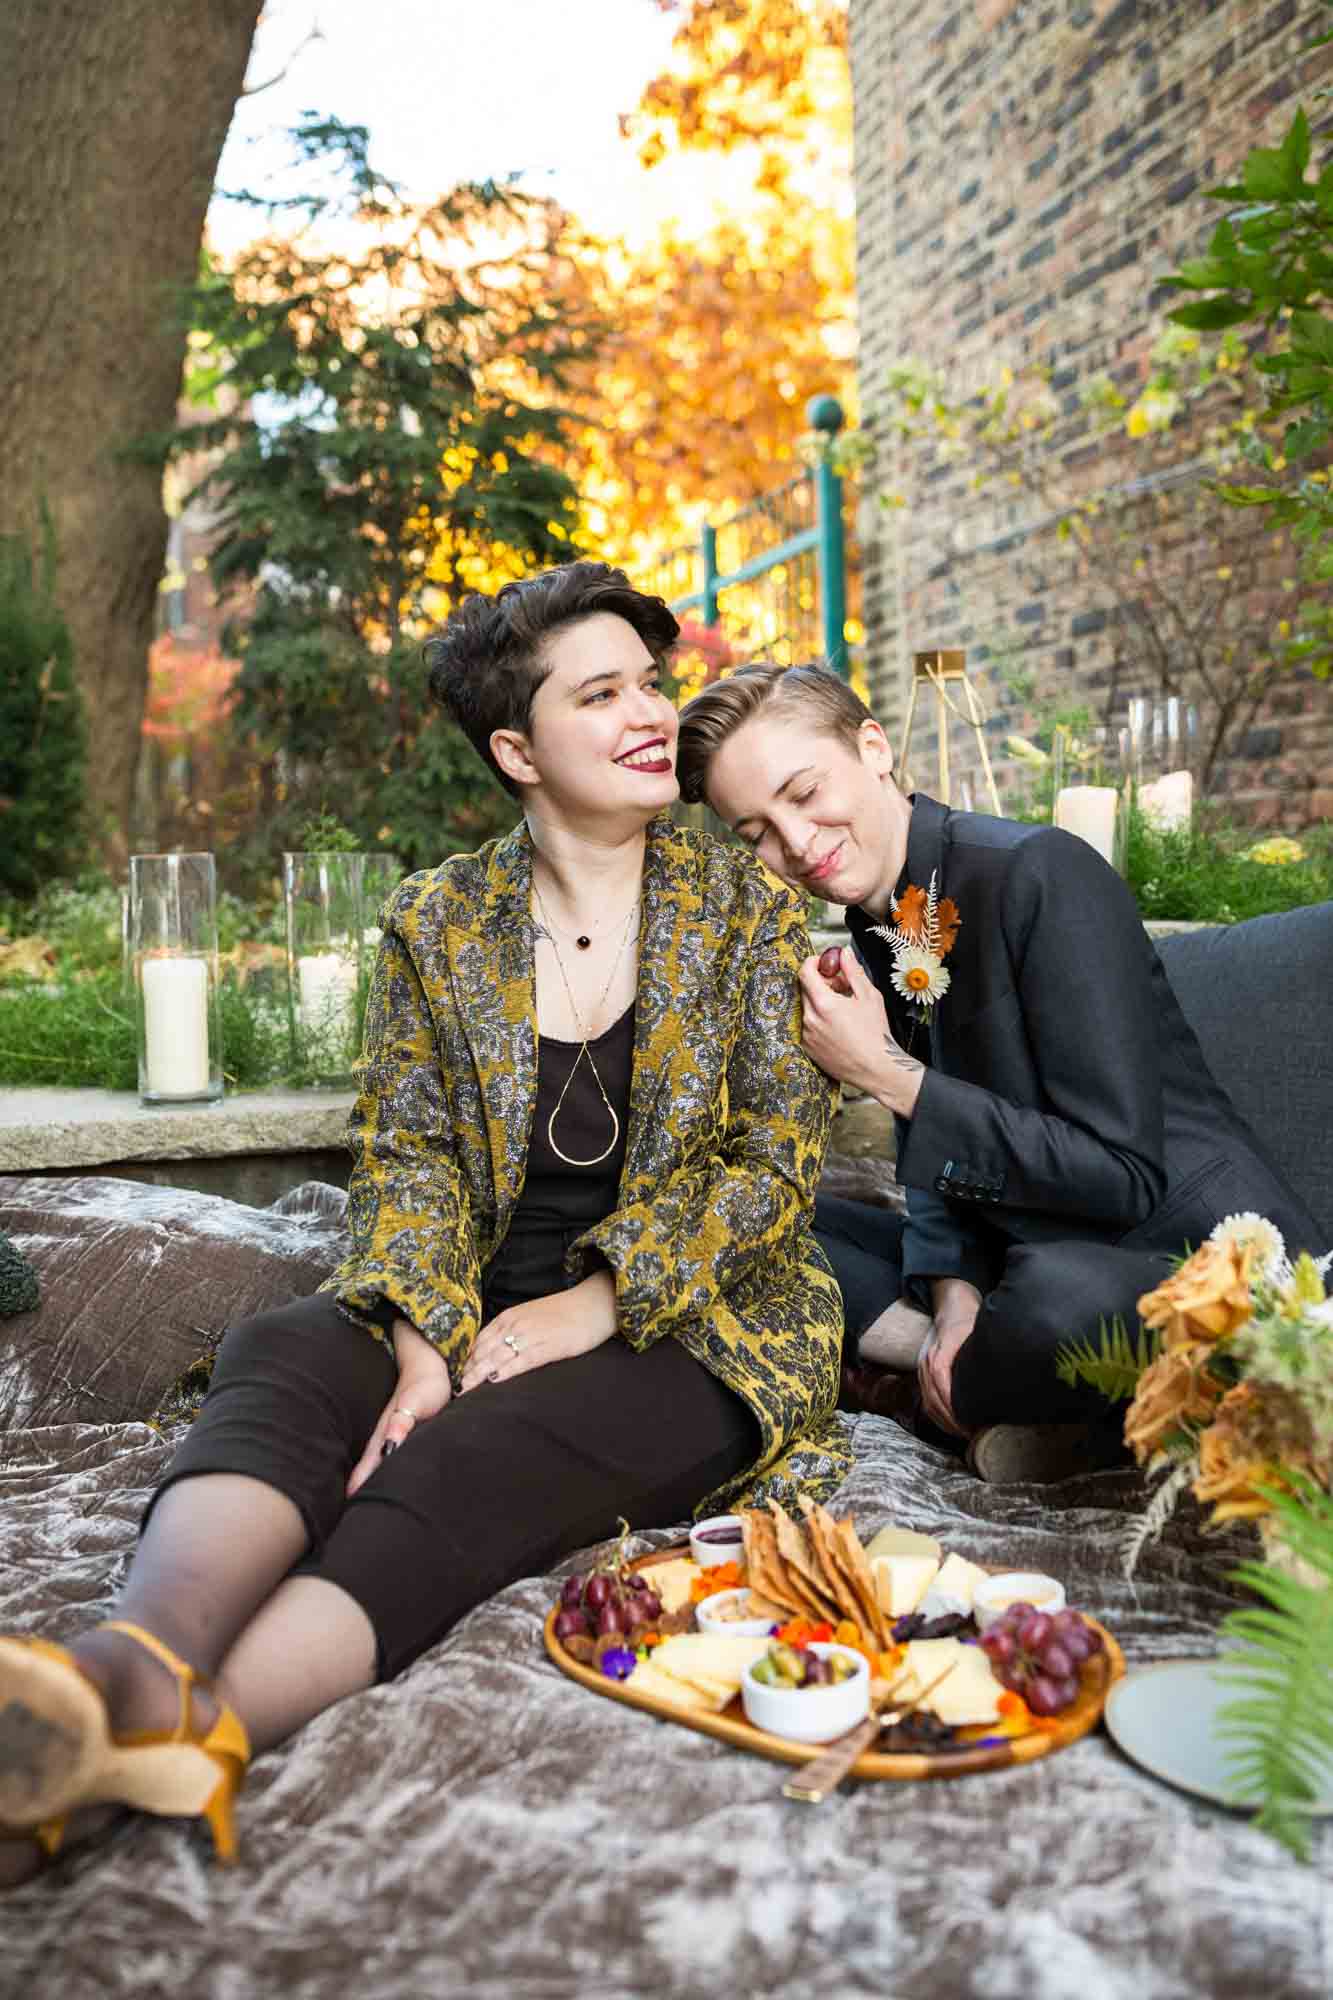 Moody fall picnic proposal ideas with cheeseboard and bottled cocktails | AJ Abelman | Featured on Equally Wed, the leading LGBTQ+ wedding magazine